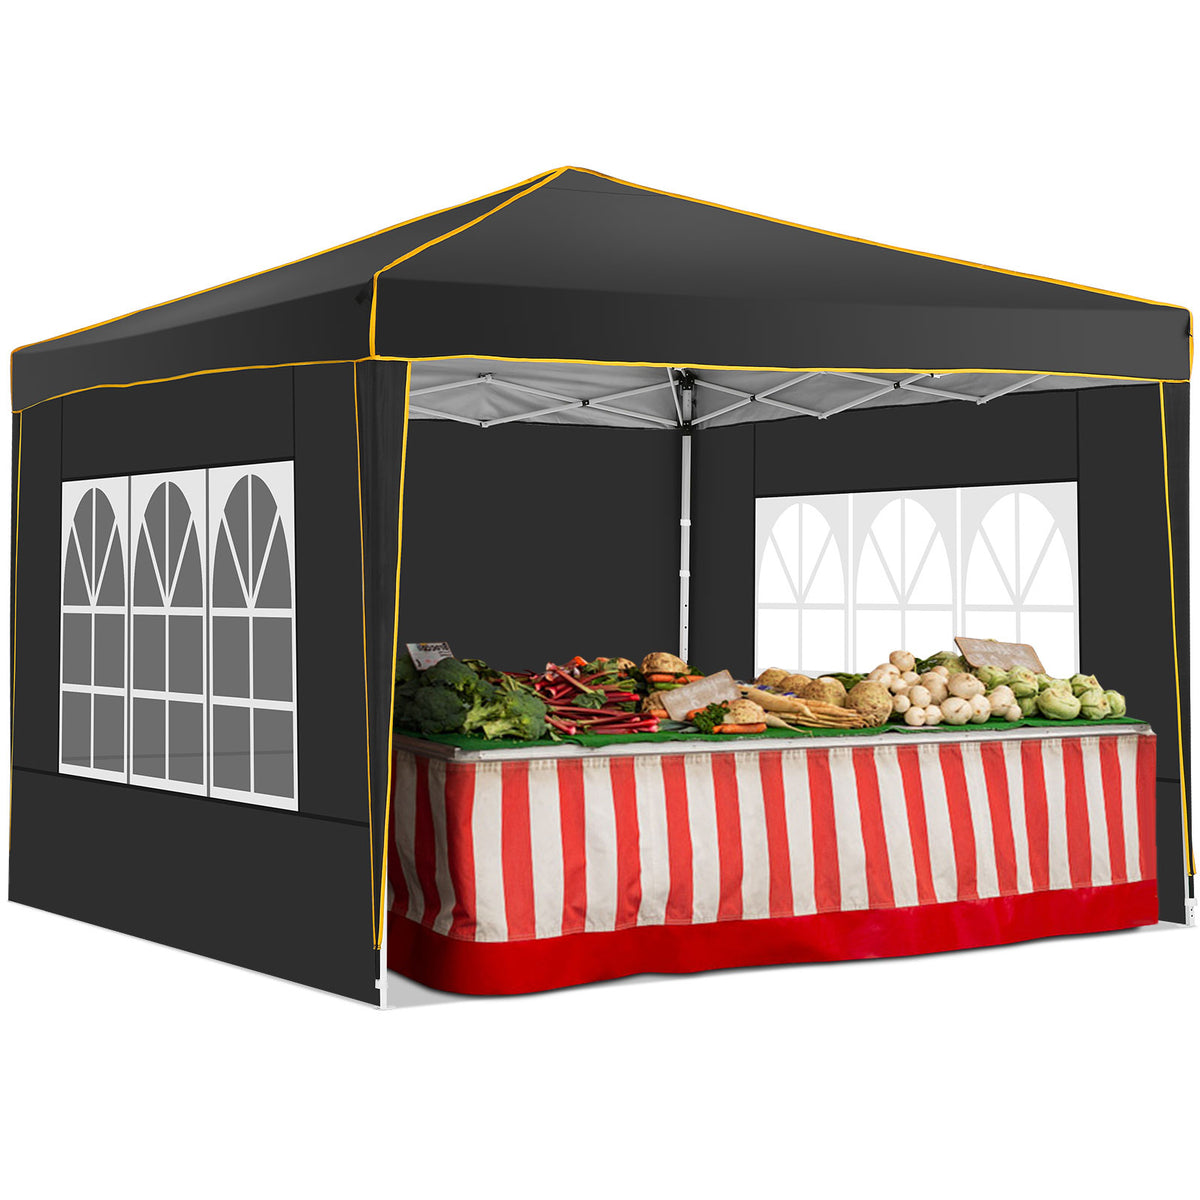 COBIZI 10x10 Pop up Canopy with Sidewalls,Waterproof Tent for Parties Wedding Event,Instant Outdoor Gazebos with Carry Bag,Stakes,Ropes & Sandbags